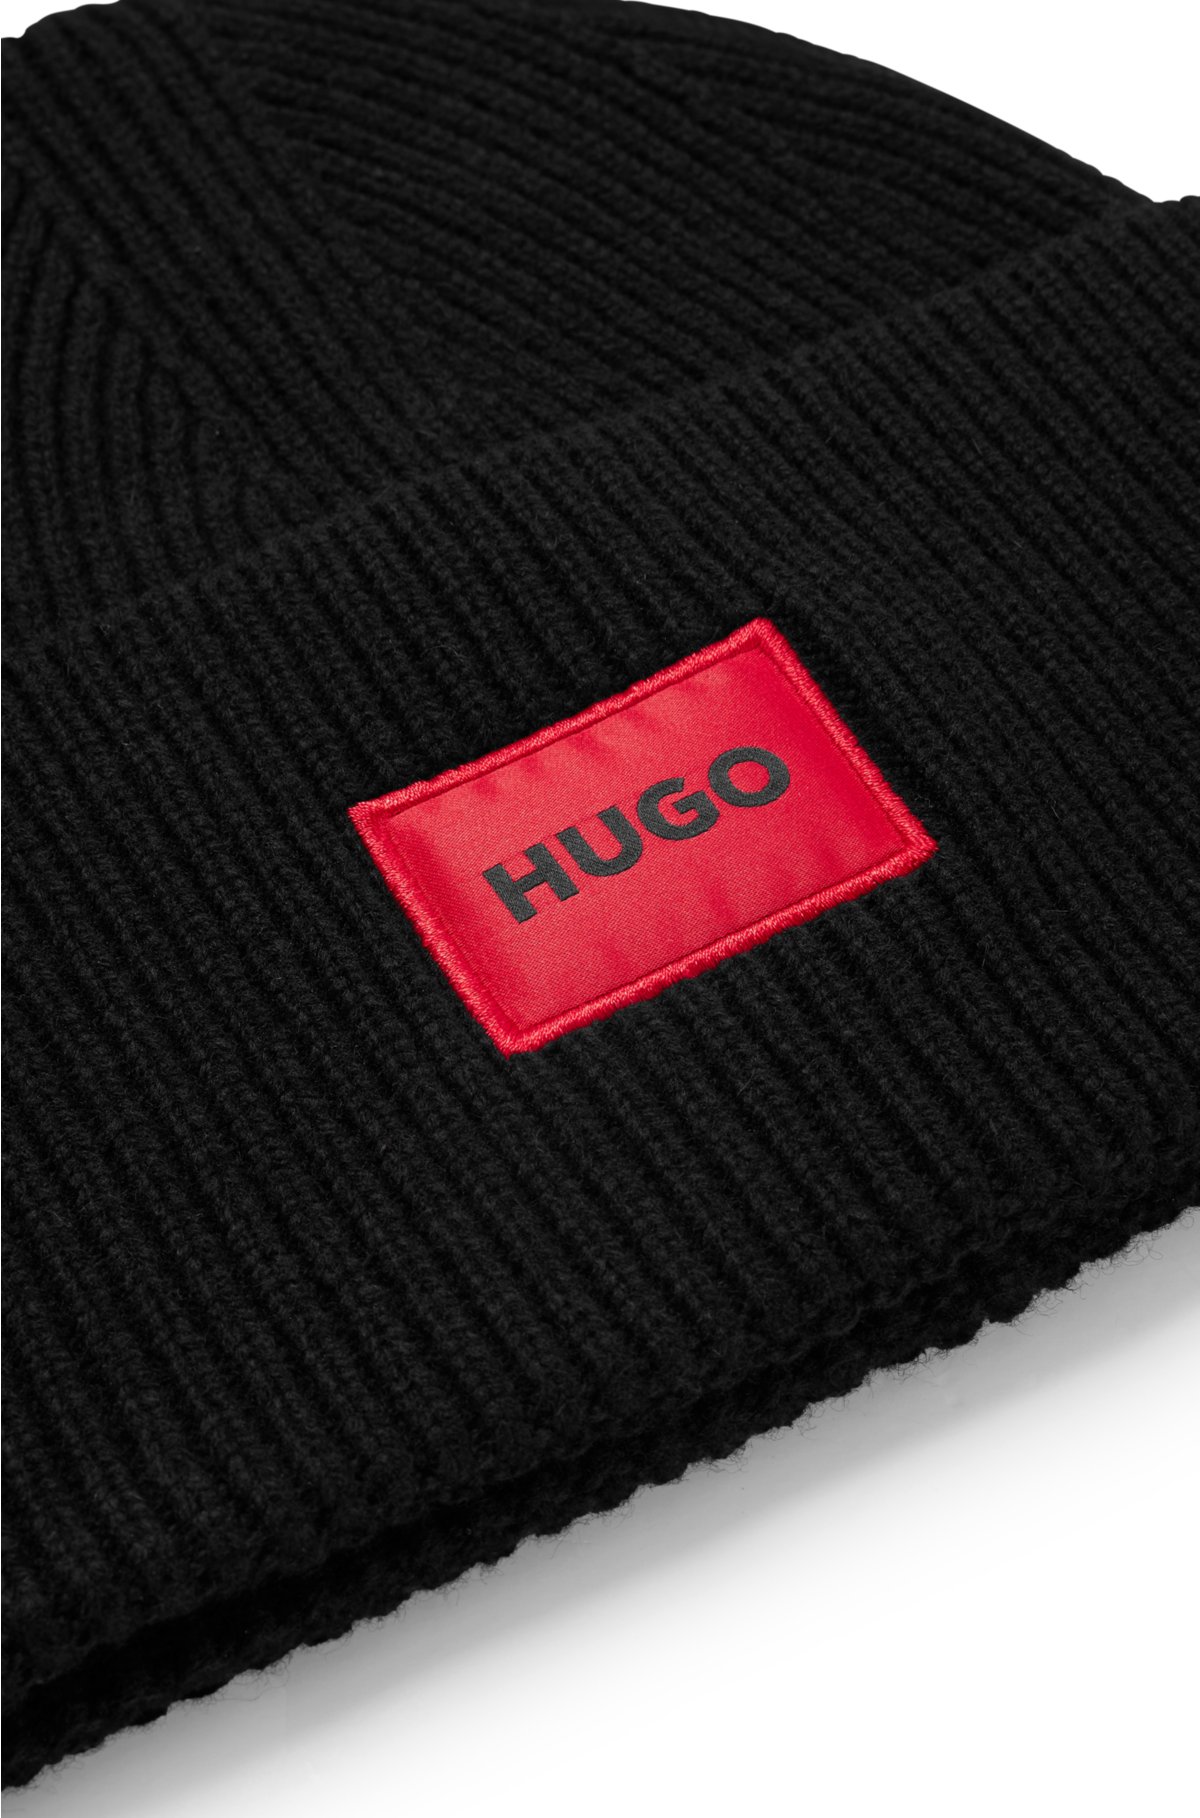 HUGO - Wool-blend beanie hat logo red with label